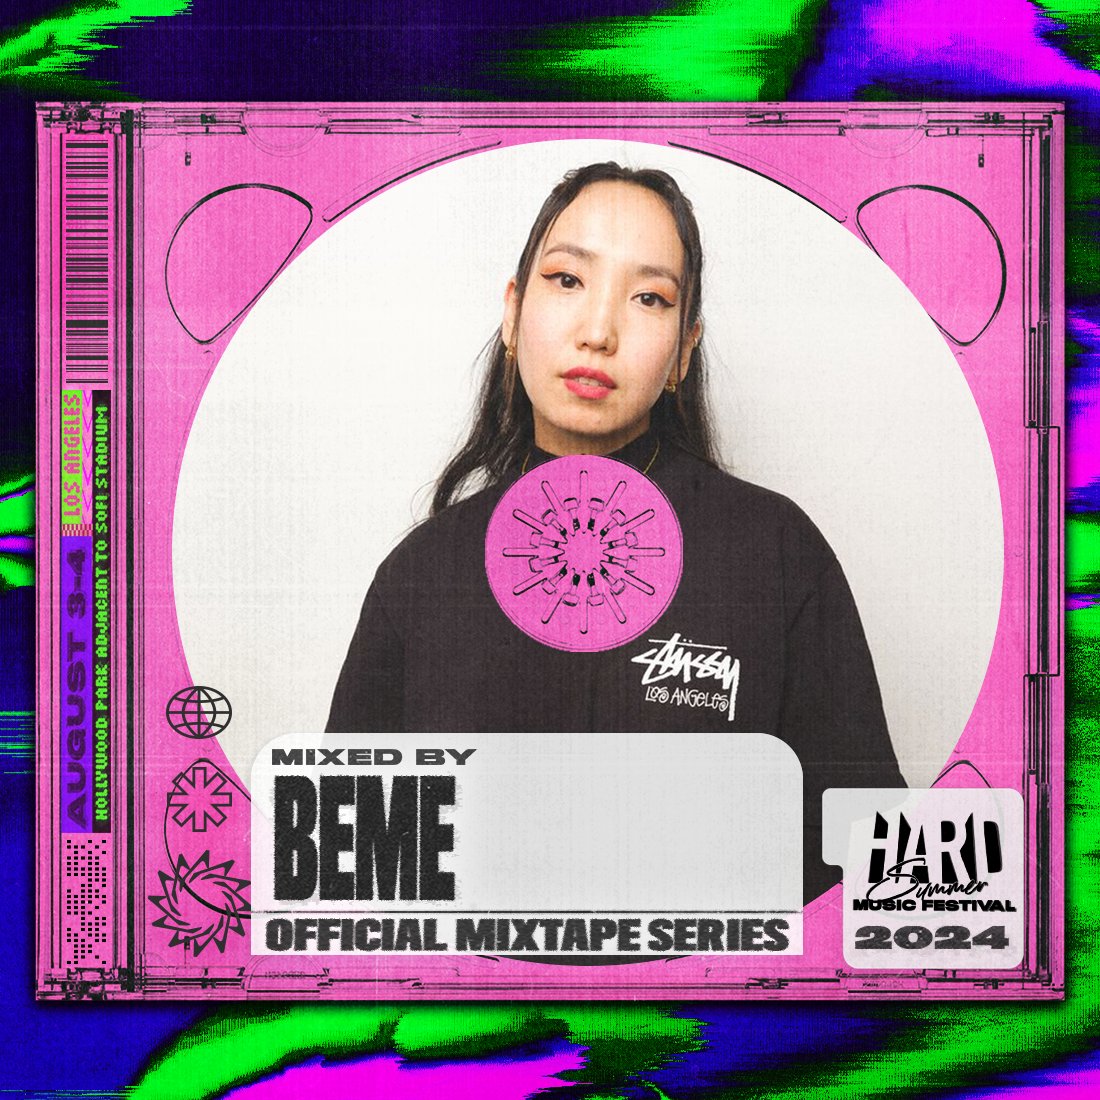 hitting Monday with some good chunes courtesy of BEME's offering to our 2K24 Mixtape Series 🔊 hardfest.co/2k24-mixtapes